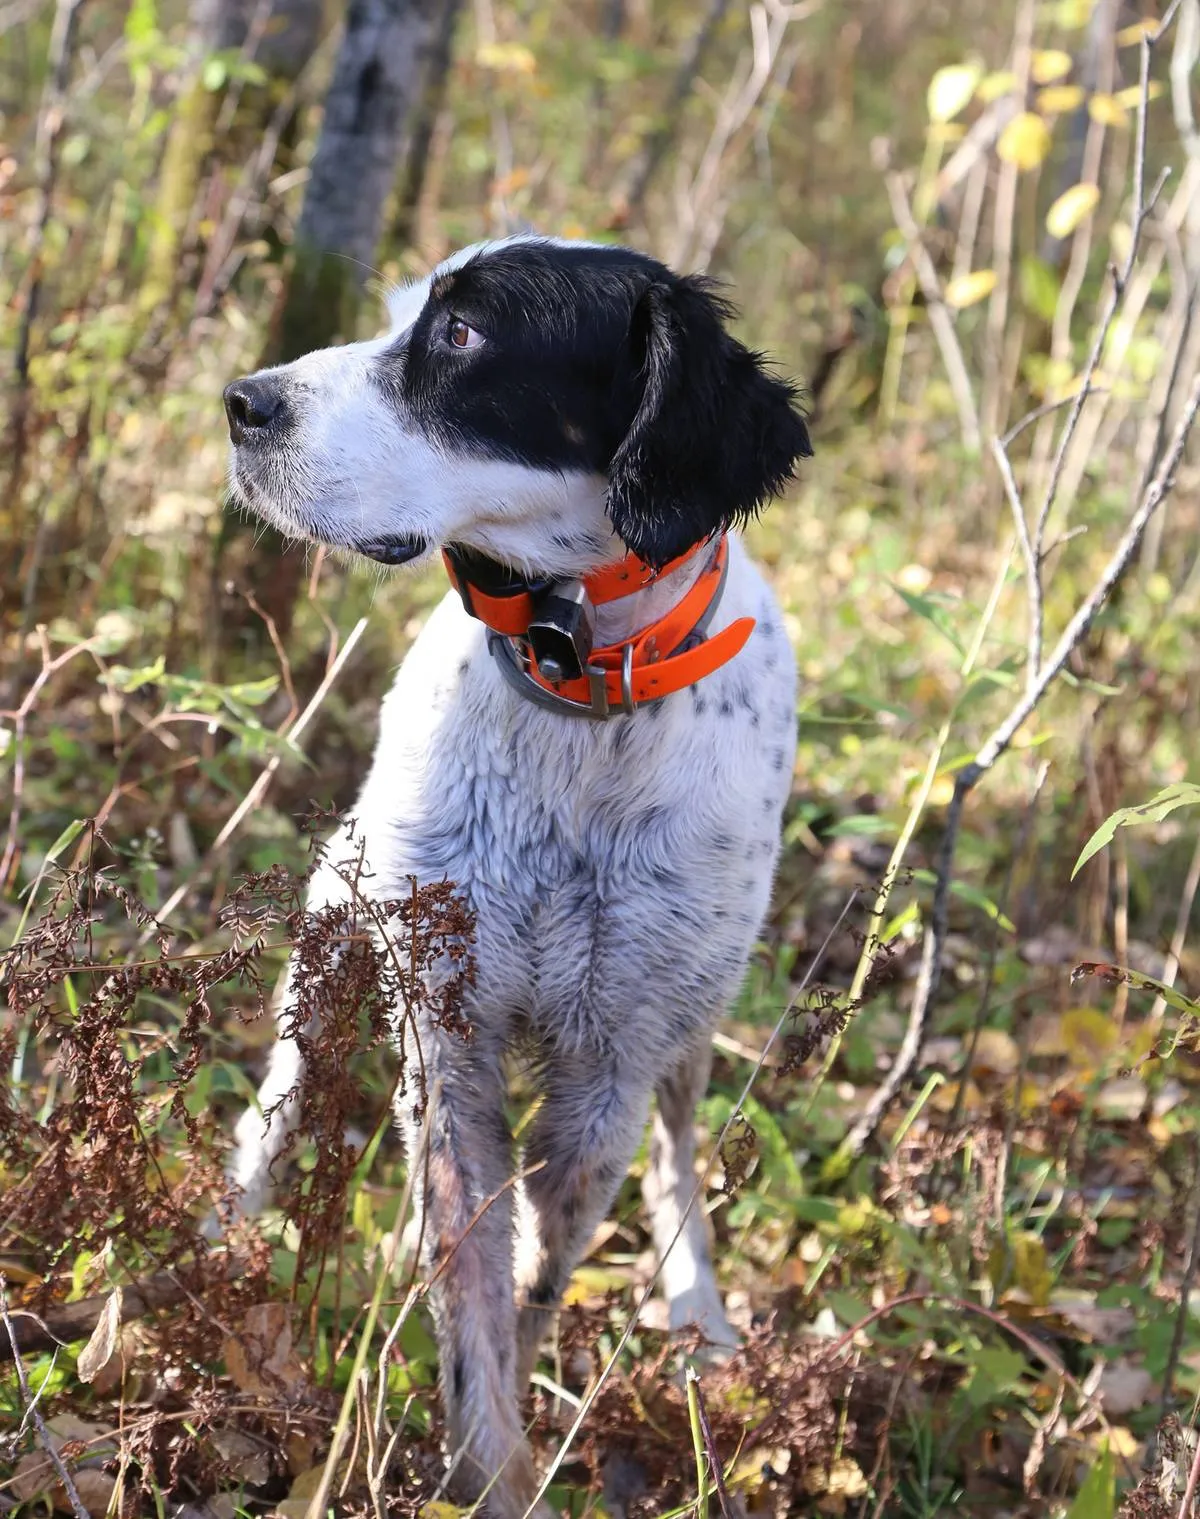 Shaq, an English setter owned by Jerry Kolter and his wife, Betsy Danielson, of rural Sandstone, Minn., points a woodcock while hunting in Pine County.